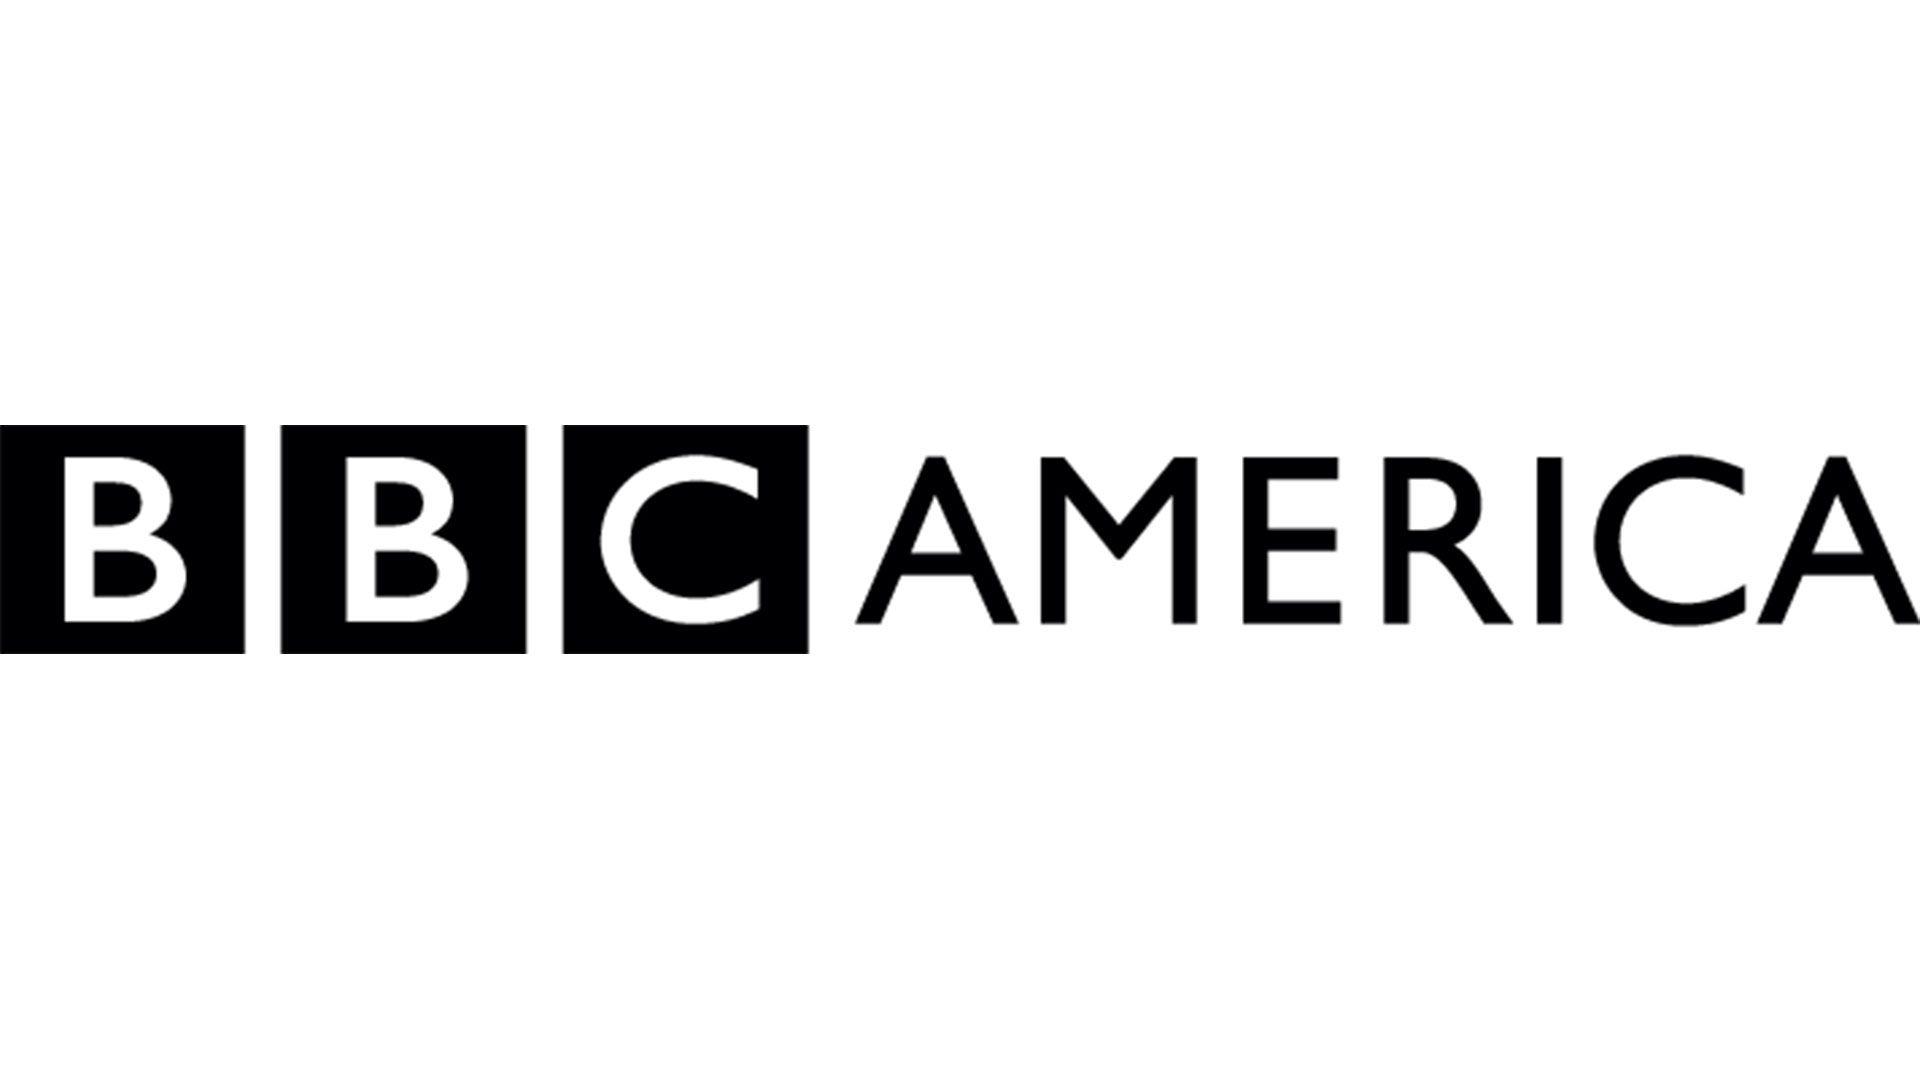 BBCA Logo - Doctor Who' Spin-Off, Adele, and New Thriller Come to BBC America in ...